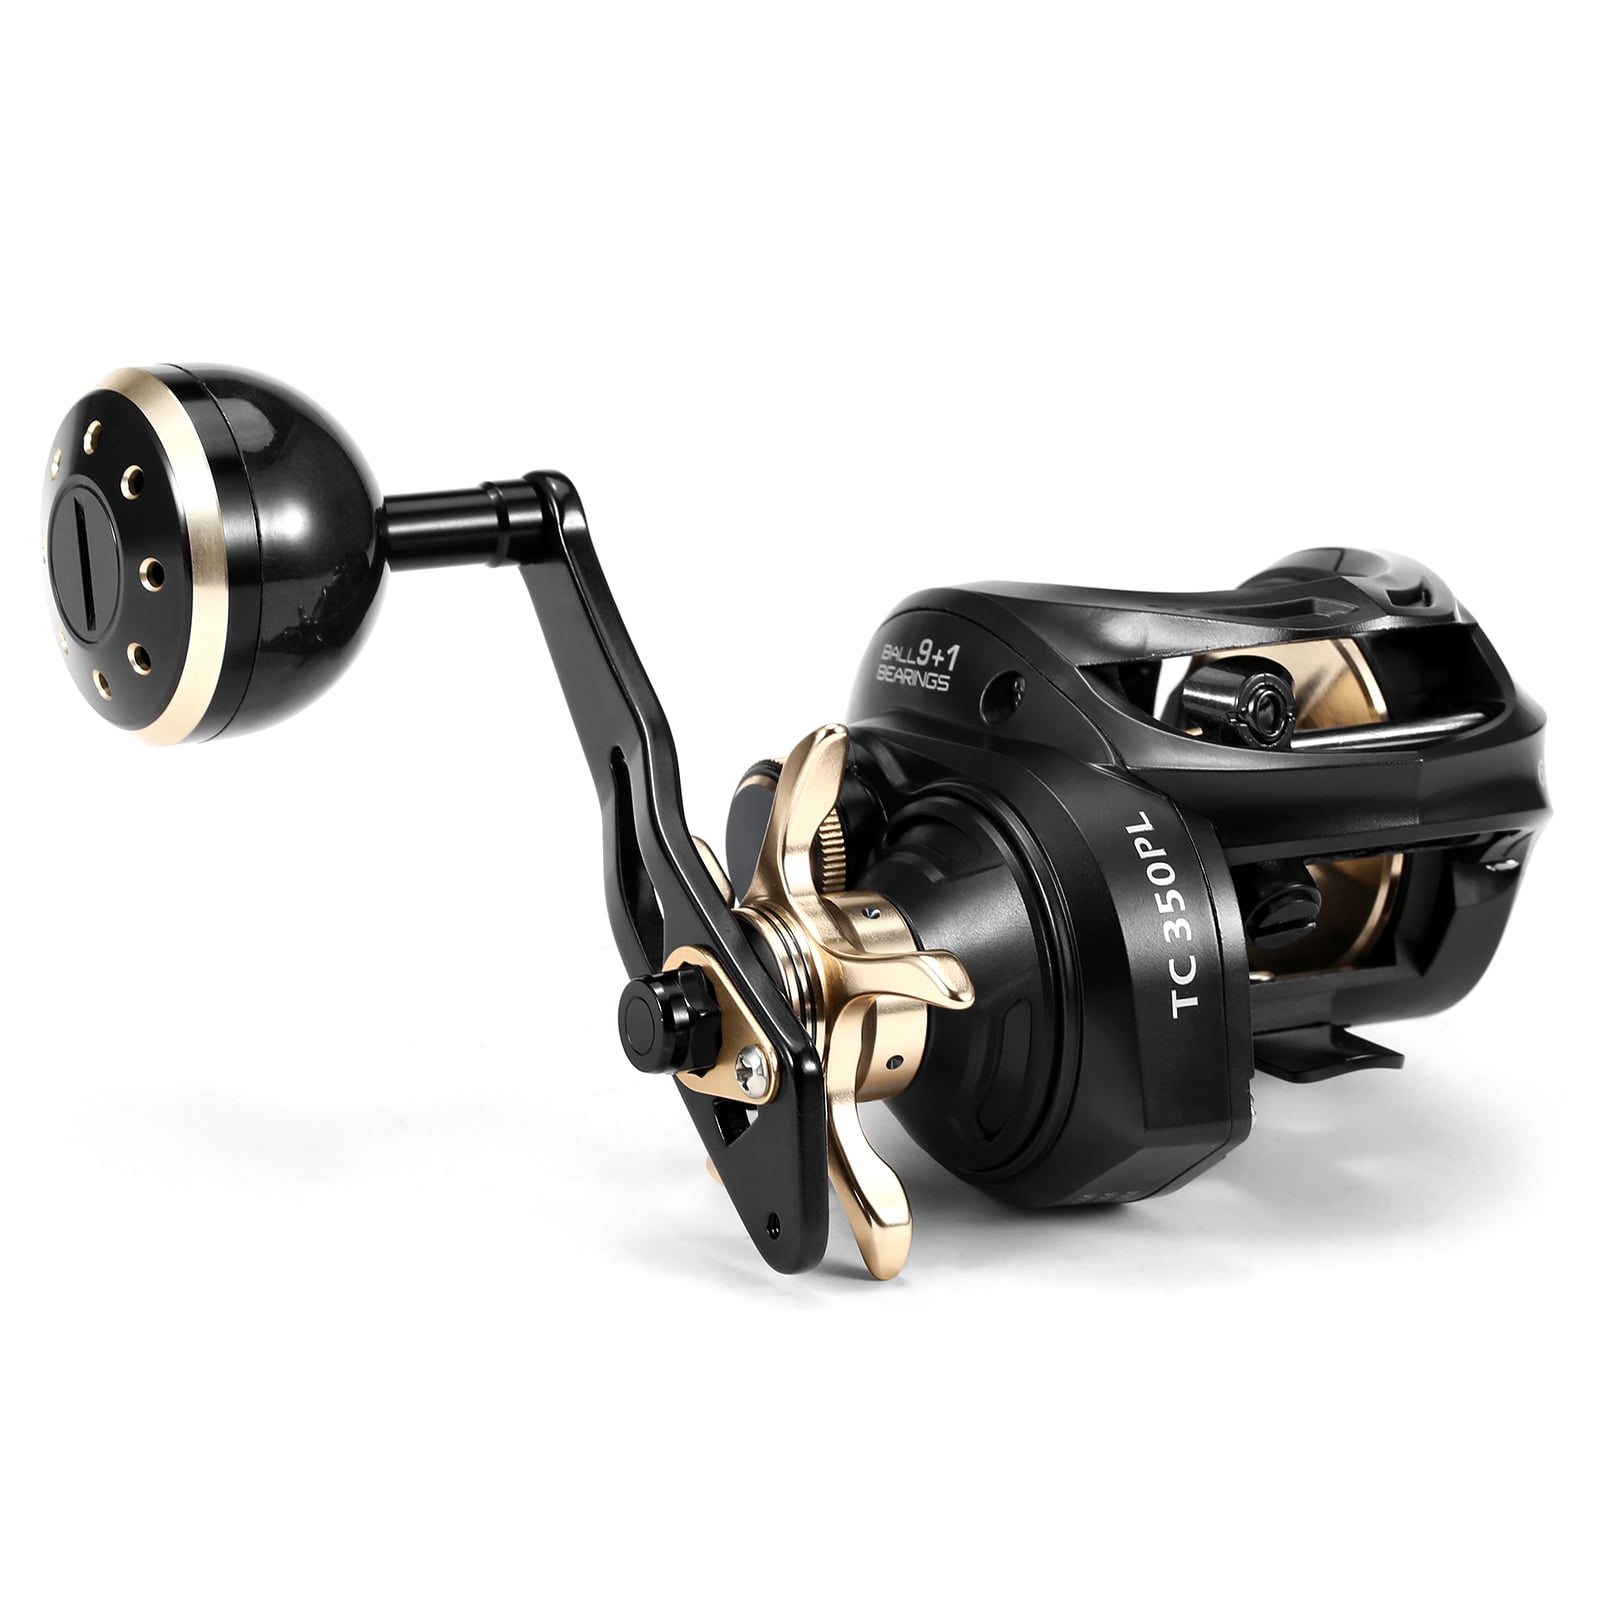 Durable Carbon Fiber Baitcasting Reel 9+1BB Fishing Reel, High Speed 6.31  Gear Ratio, Magnetic Brake System, Right Hand 